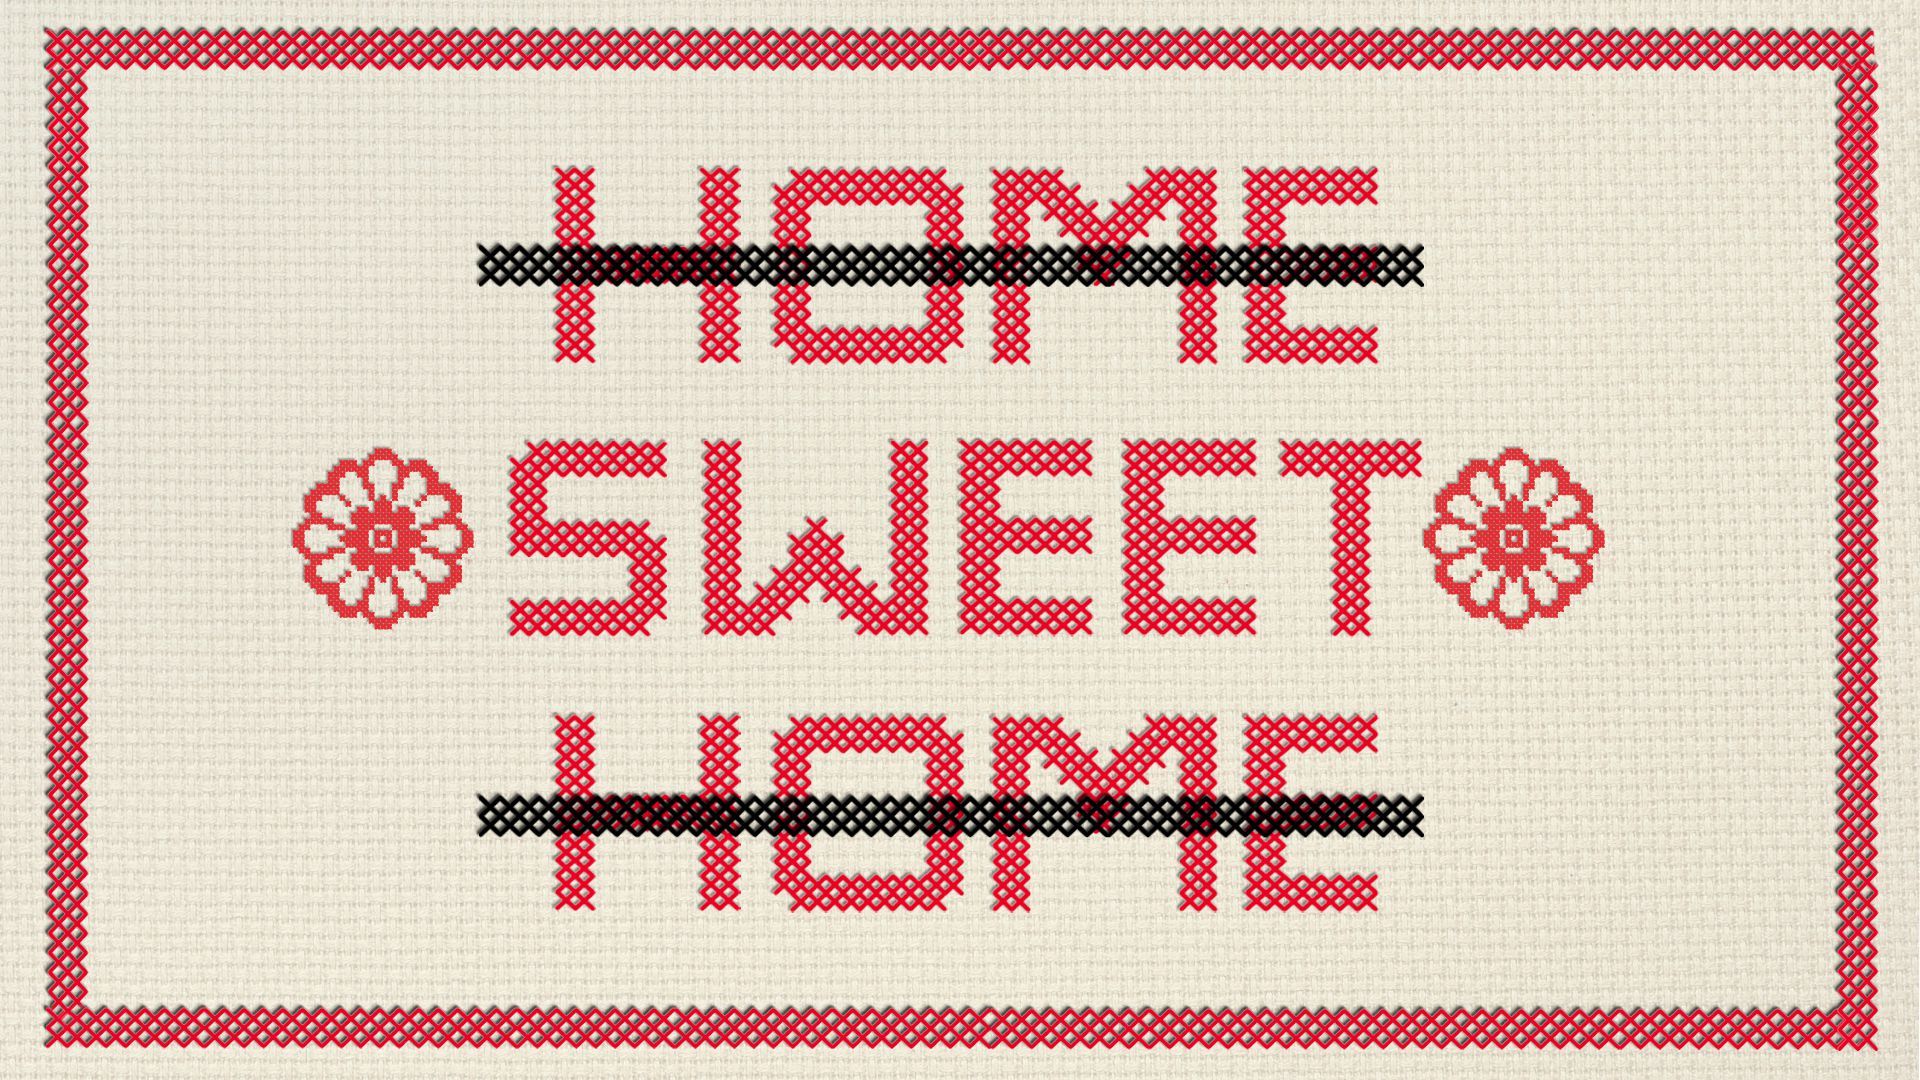 Illustration of a cross-stitched “Home Sweet Home” with "Home" crossed out. 